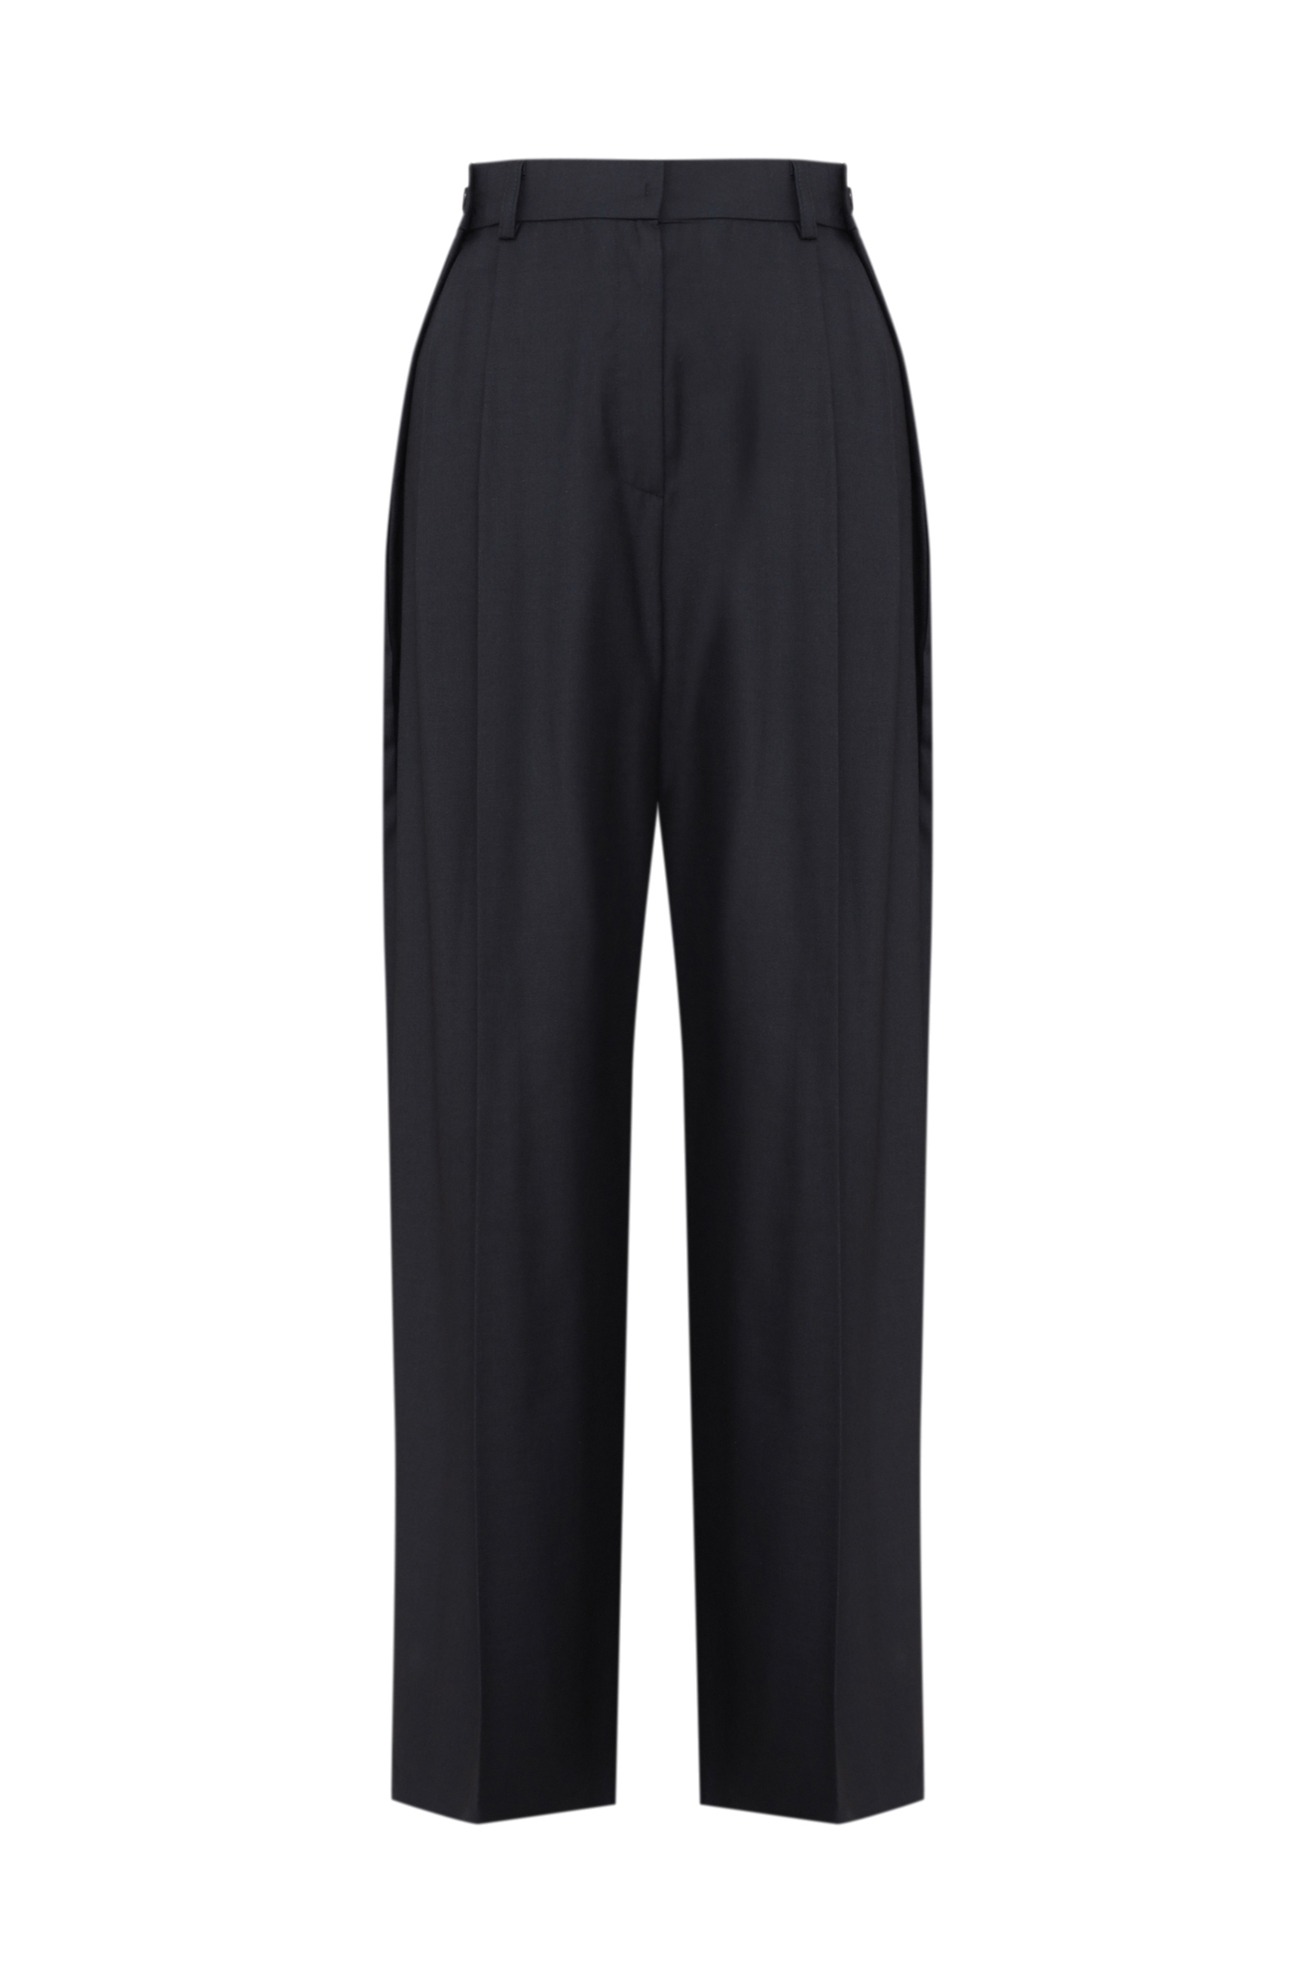 Double Folded Waistband Trousers  9/22 순차발송